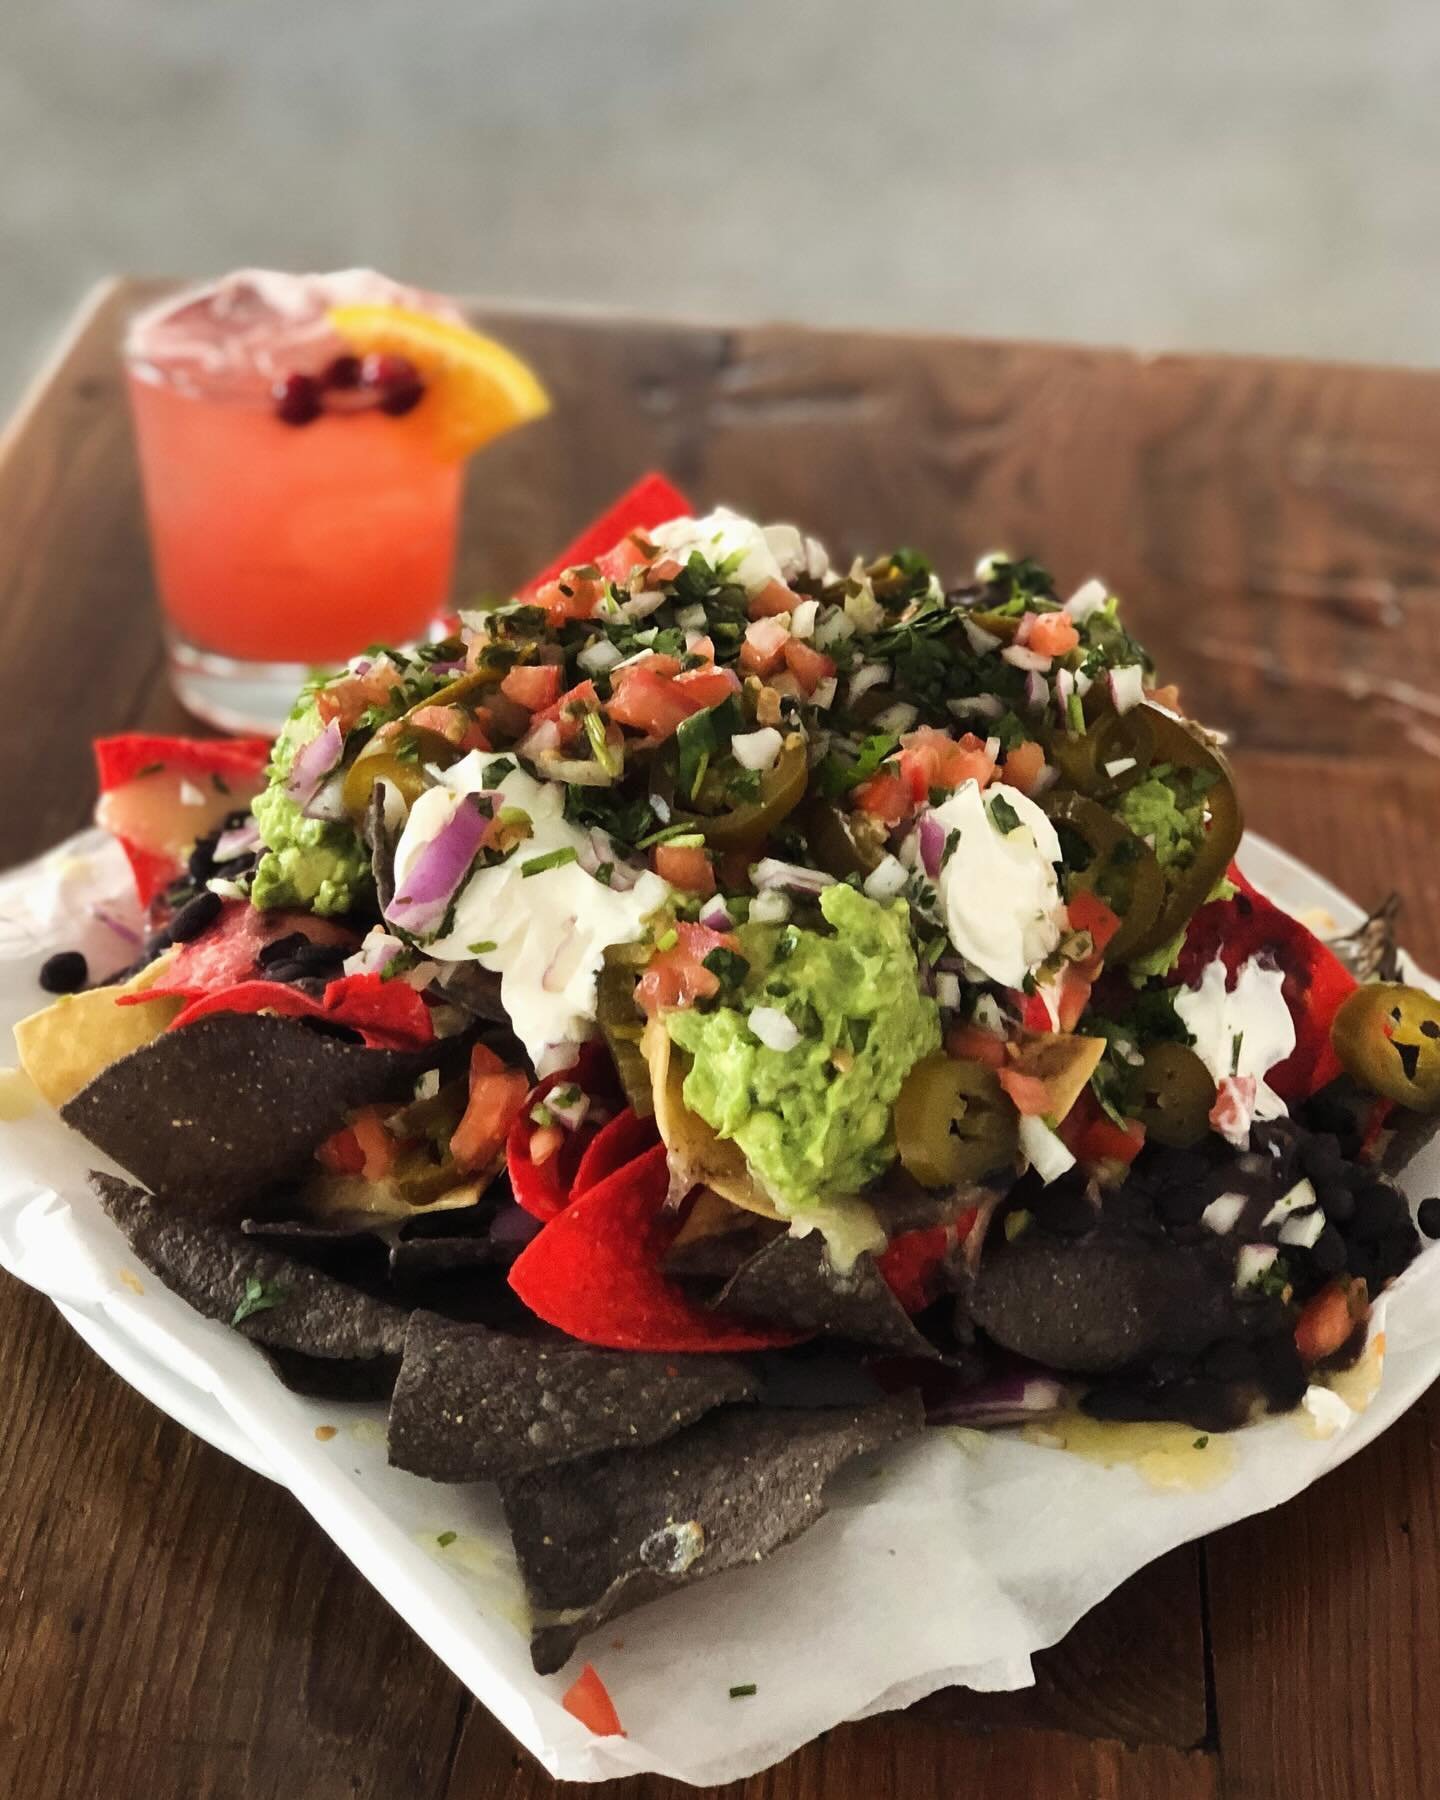 It is Nacho Night at Santa Fe Woodstock!
Every TUESDAY, and only on Tuesdays, enjoy our amazing nachos! 
Tortilla chips piled high with white cheddar, black beans, guacamole, pico de gallo, jalape&ntilde;os, and sour cream.
Combine an order of nachos